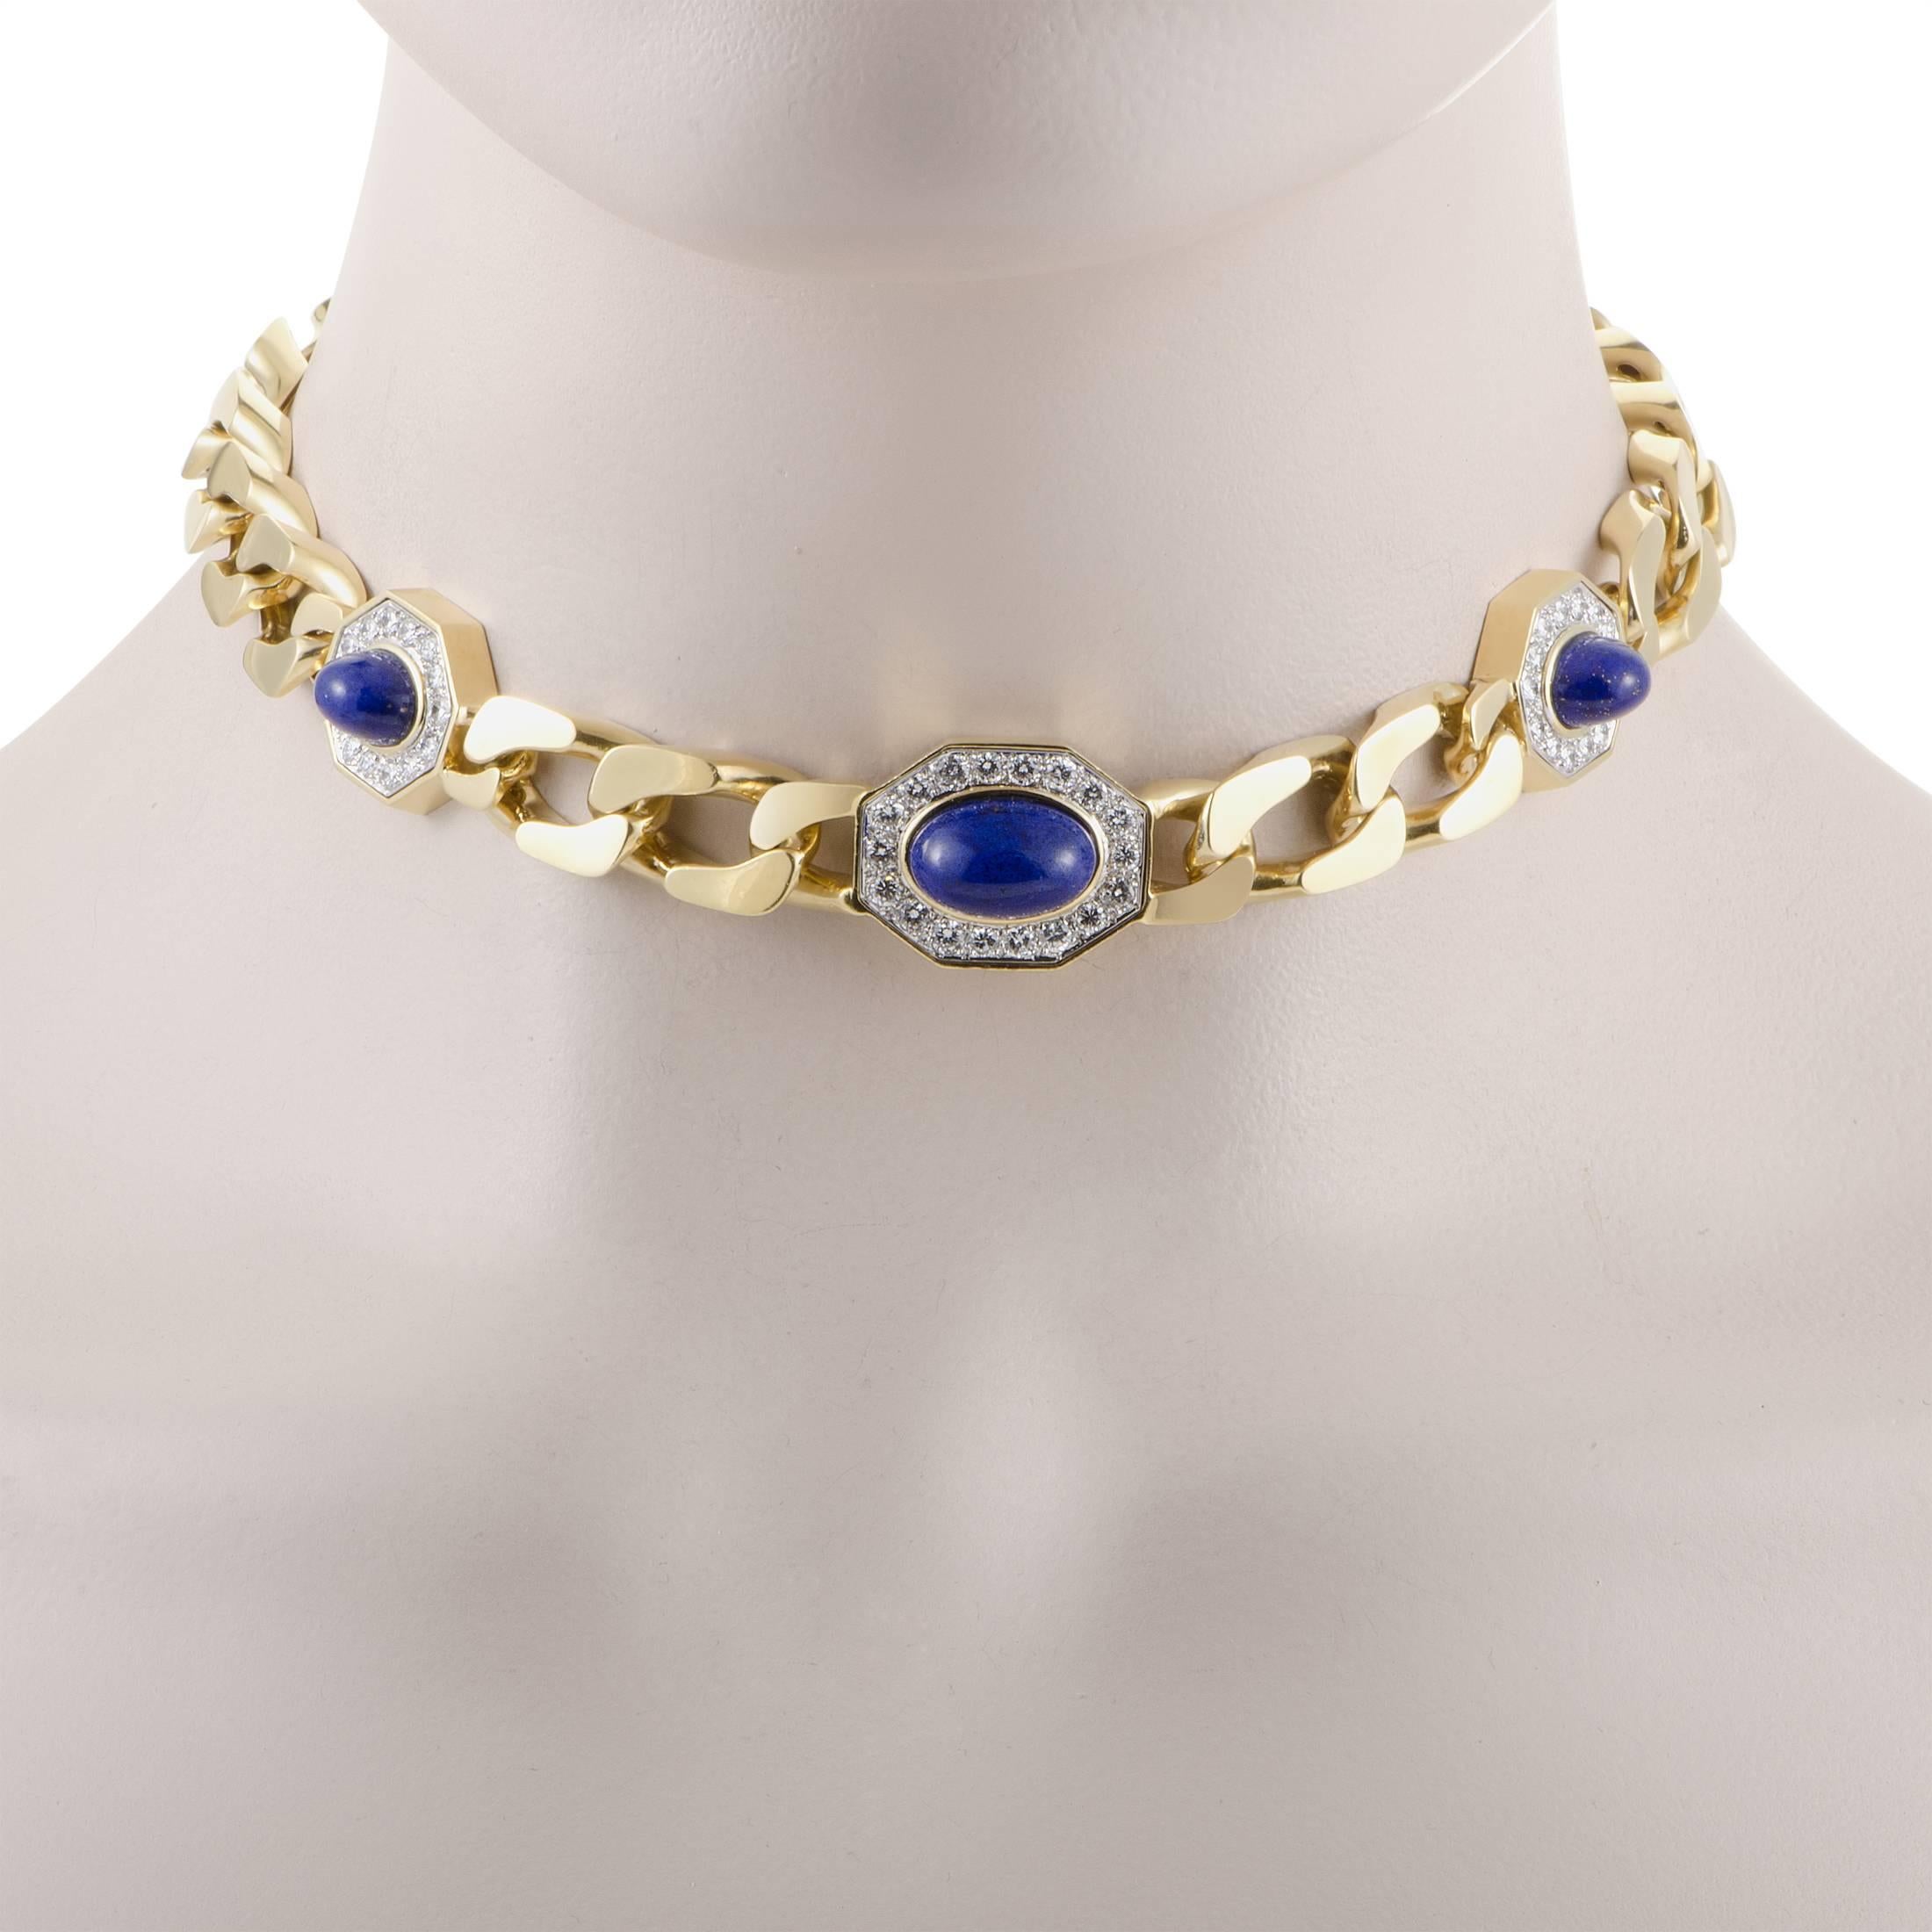 Designed in a tasteful and aesthetically pleasing manner and crafted from a prestigious blend of 18K yellow and white gold, this wonderful necklace is embellished with splendid lapis lazuli stones which are encircled with sparkling diamonds weighing